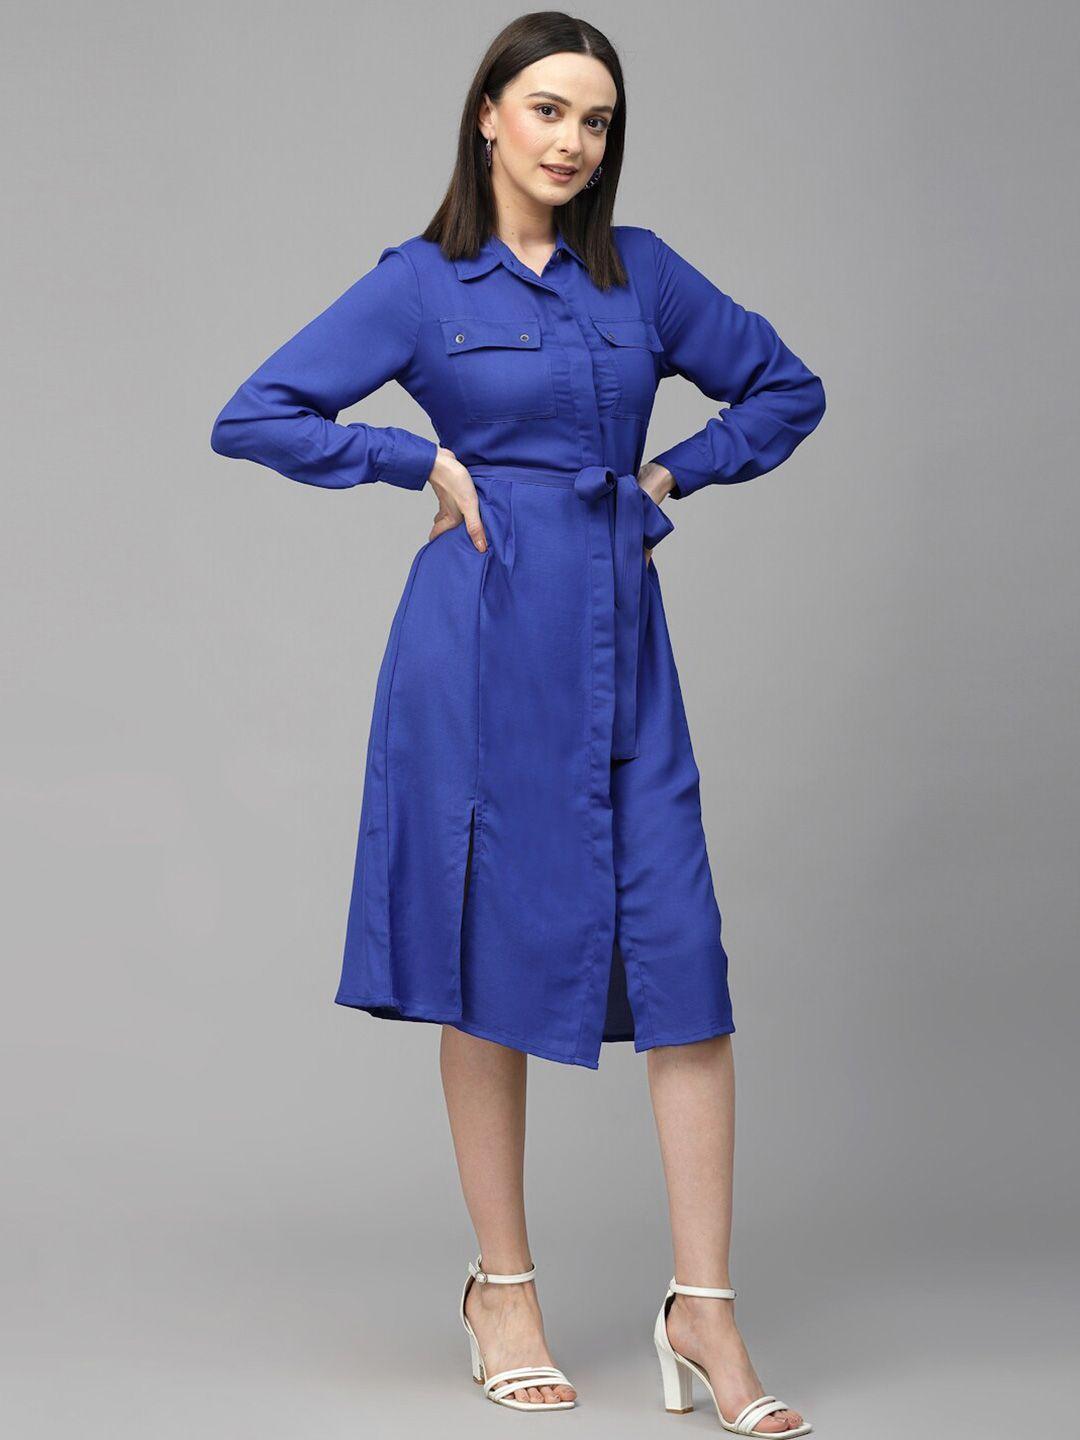 style-quotient-cuffed-sleeves-shirt-midi-dress-with-belt